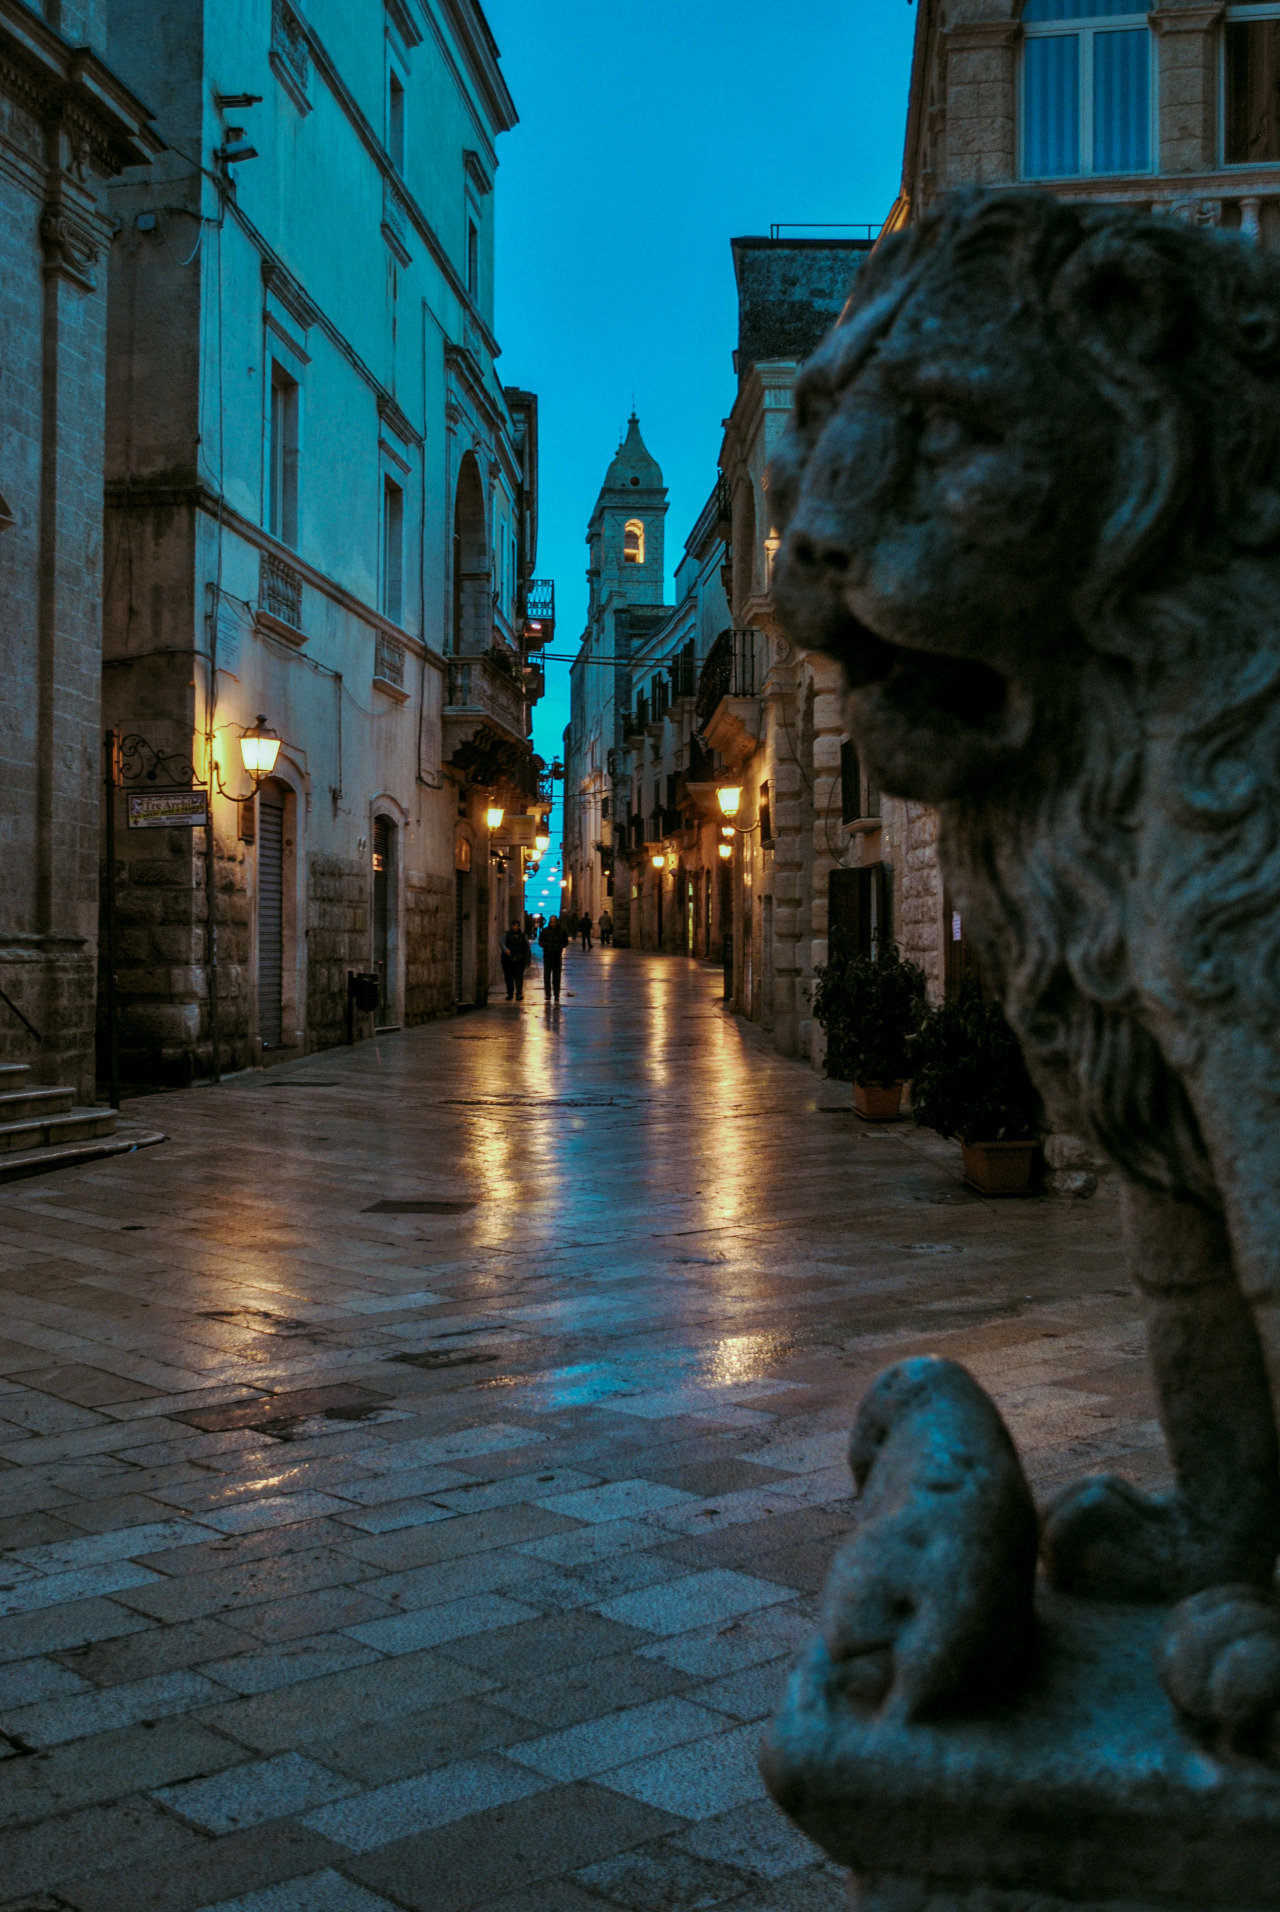 mostlyitaly:
“  Altamura (Apulia, Italy) by Dauno Settantatre
”
Dark are the streets
By which they creep.
Silence is their goal.
Through the town, they go.
Bodies left behind,
Blood-dry we will find.
Church bells are tolling,
And heads are...